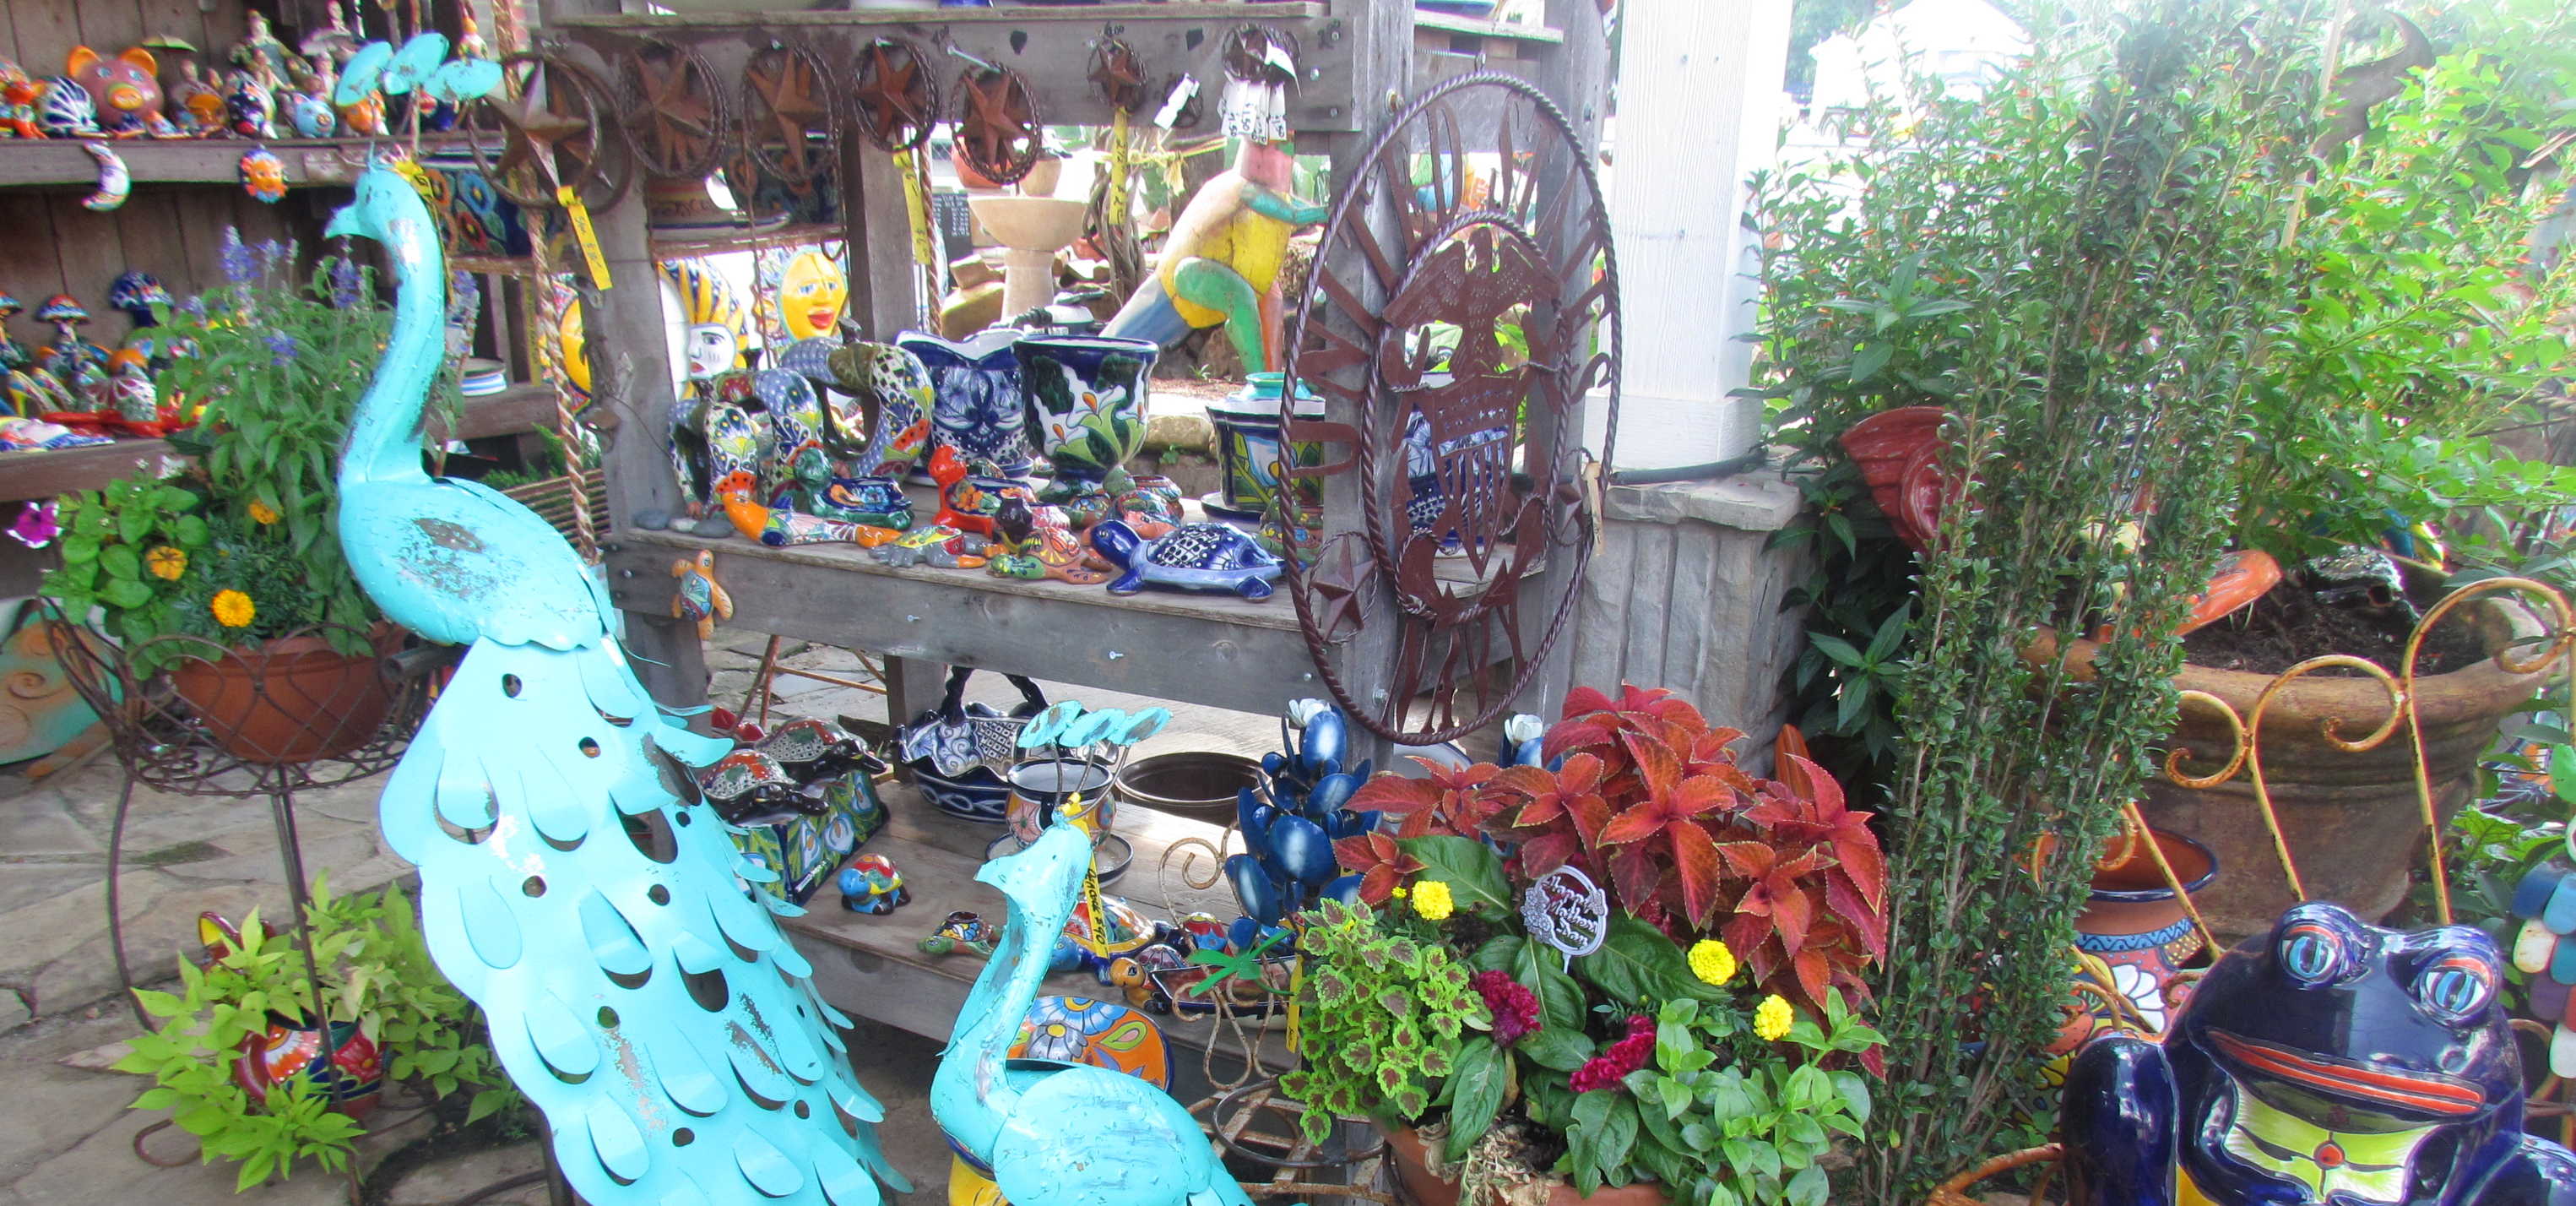 Yard decorations, Cement Statues, Talavera Pottery, Iron Decorations and more at Madison Gardens Nursery, Spring, TX.